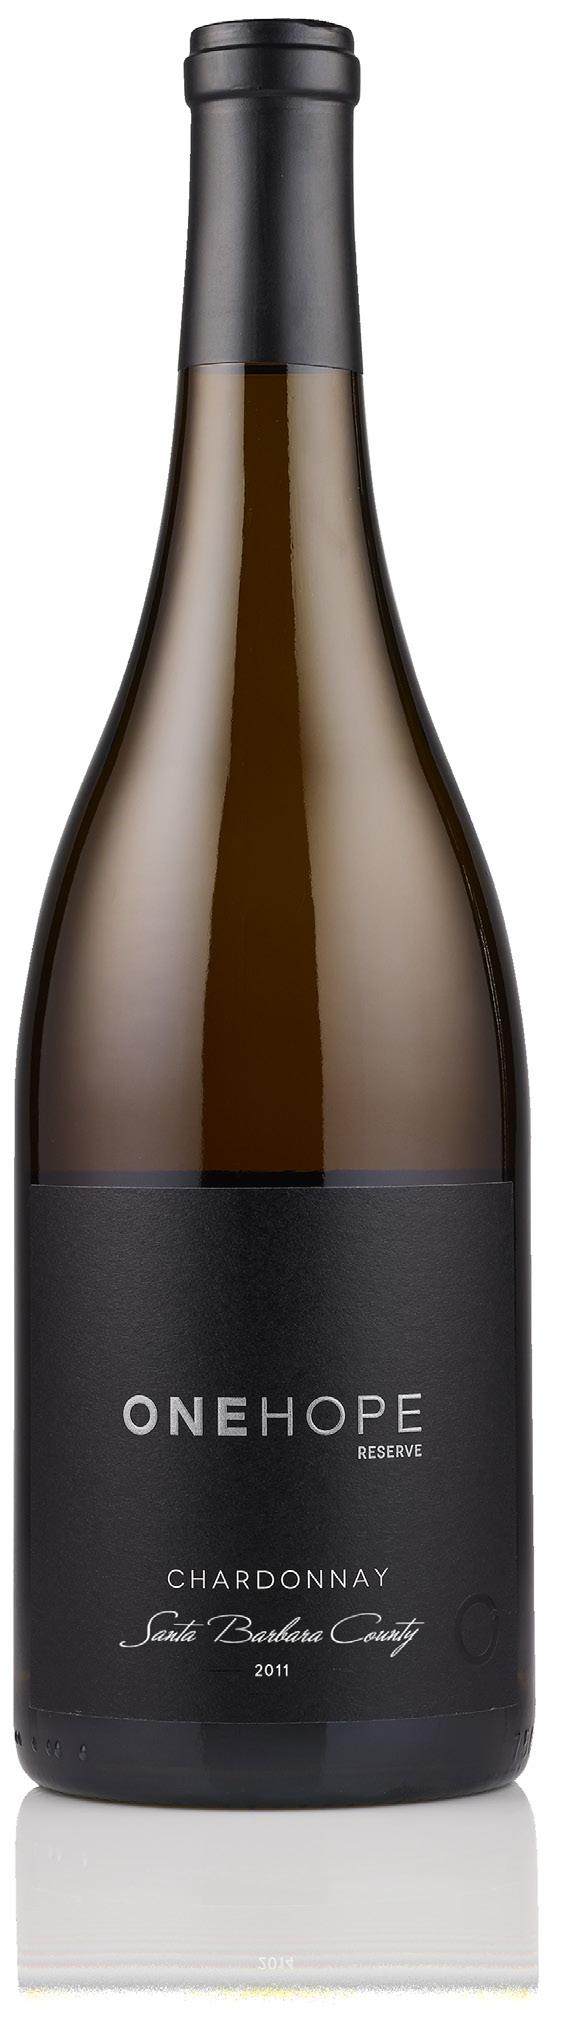 ONEHOPE SANTA BARBARA RESERVE CHARDONNAY zesty citrus white peach pear apple Aromas of zesty citrus, white peach and pear.